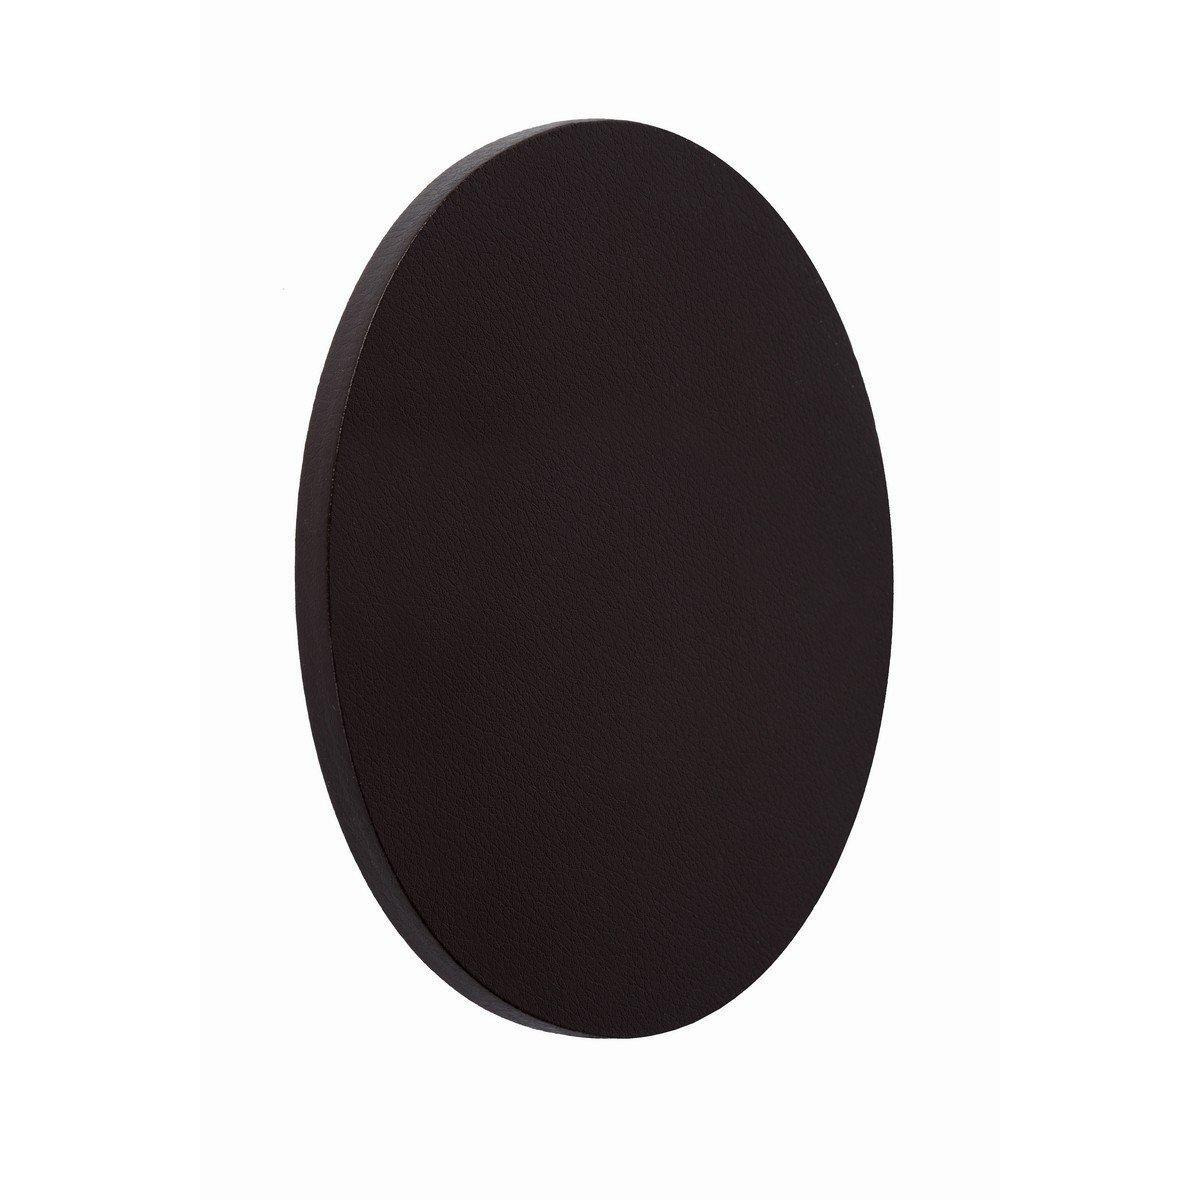 'GLIMPSE' Non Dimmable Stylish Round Modern Indoor LED Wall Light - image 1